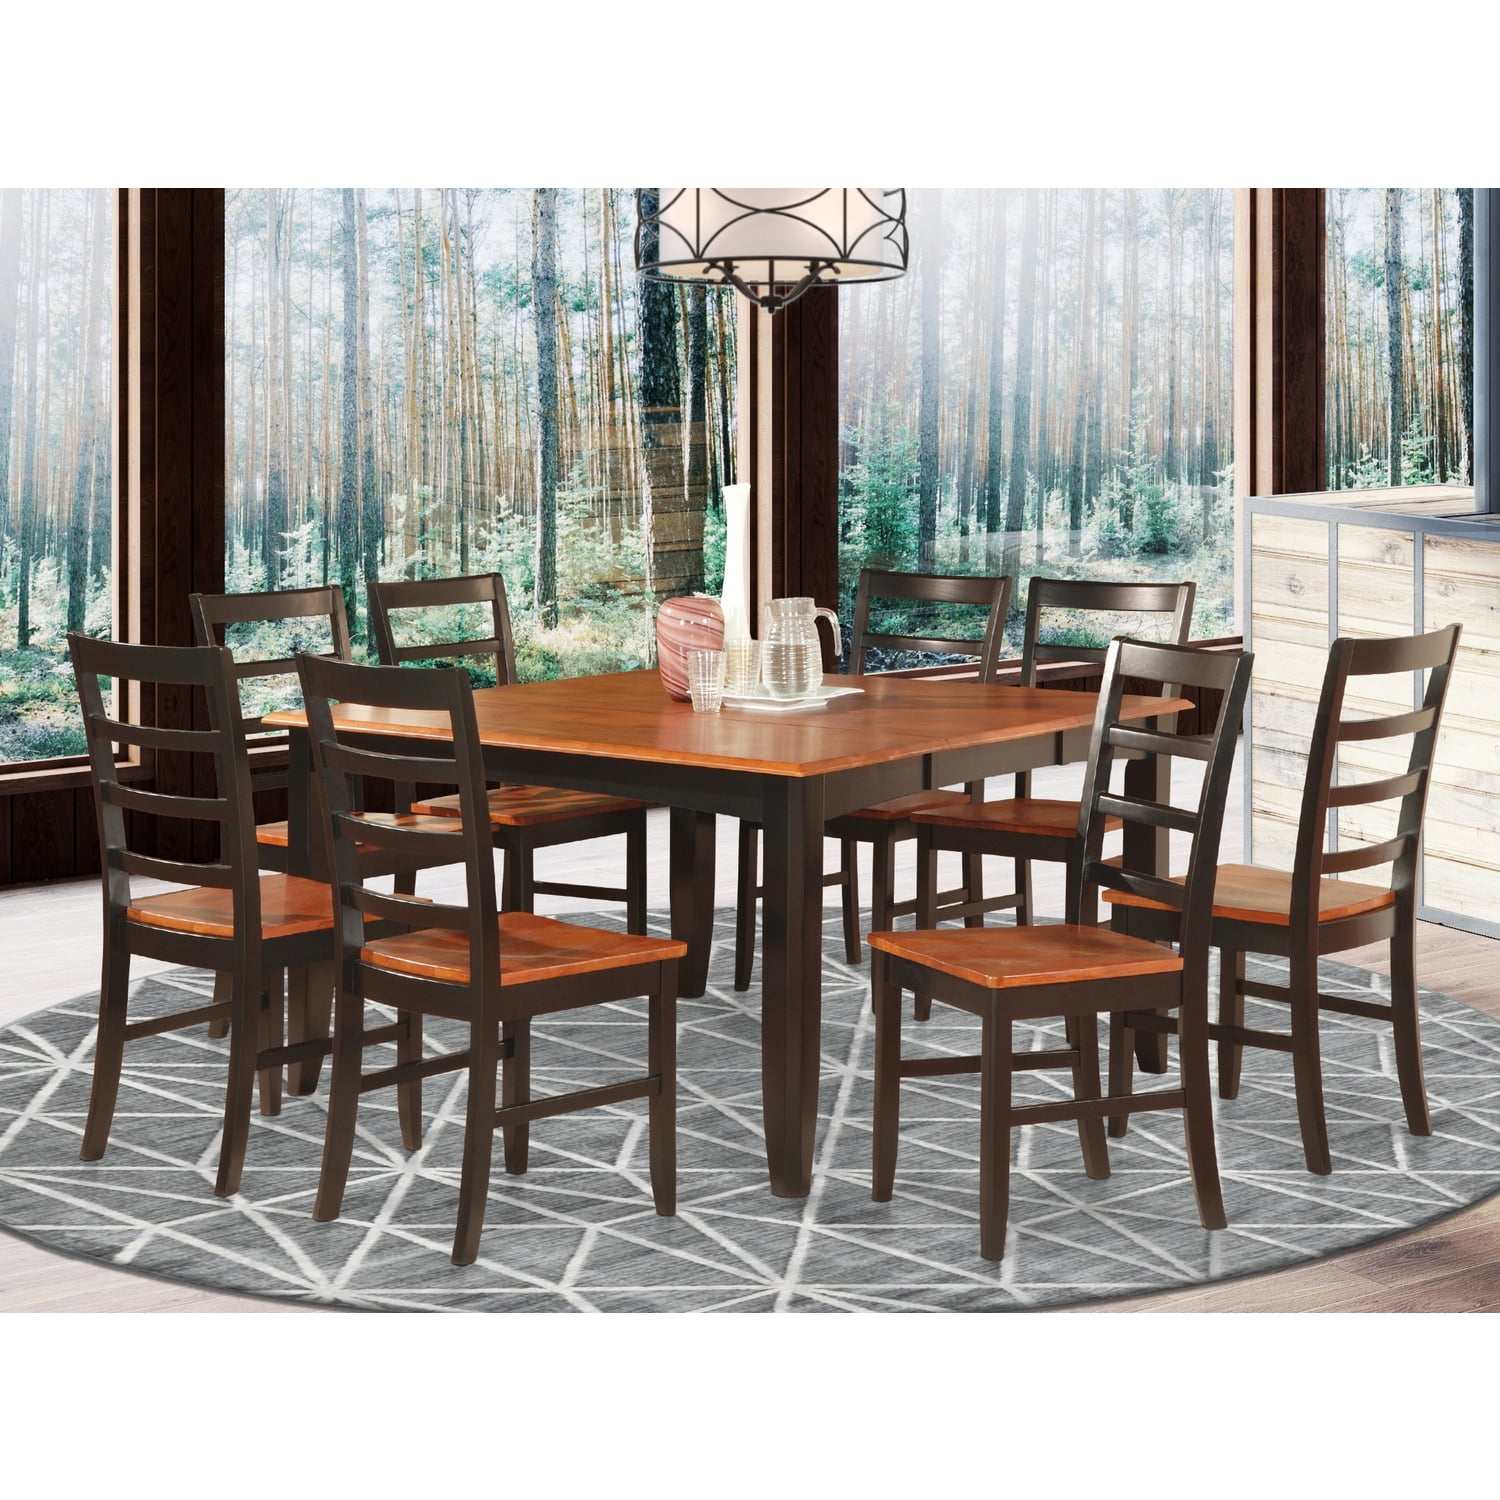 Dining Room Set Square Table, Square Dining Room Table For 8